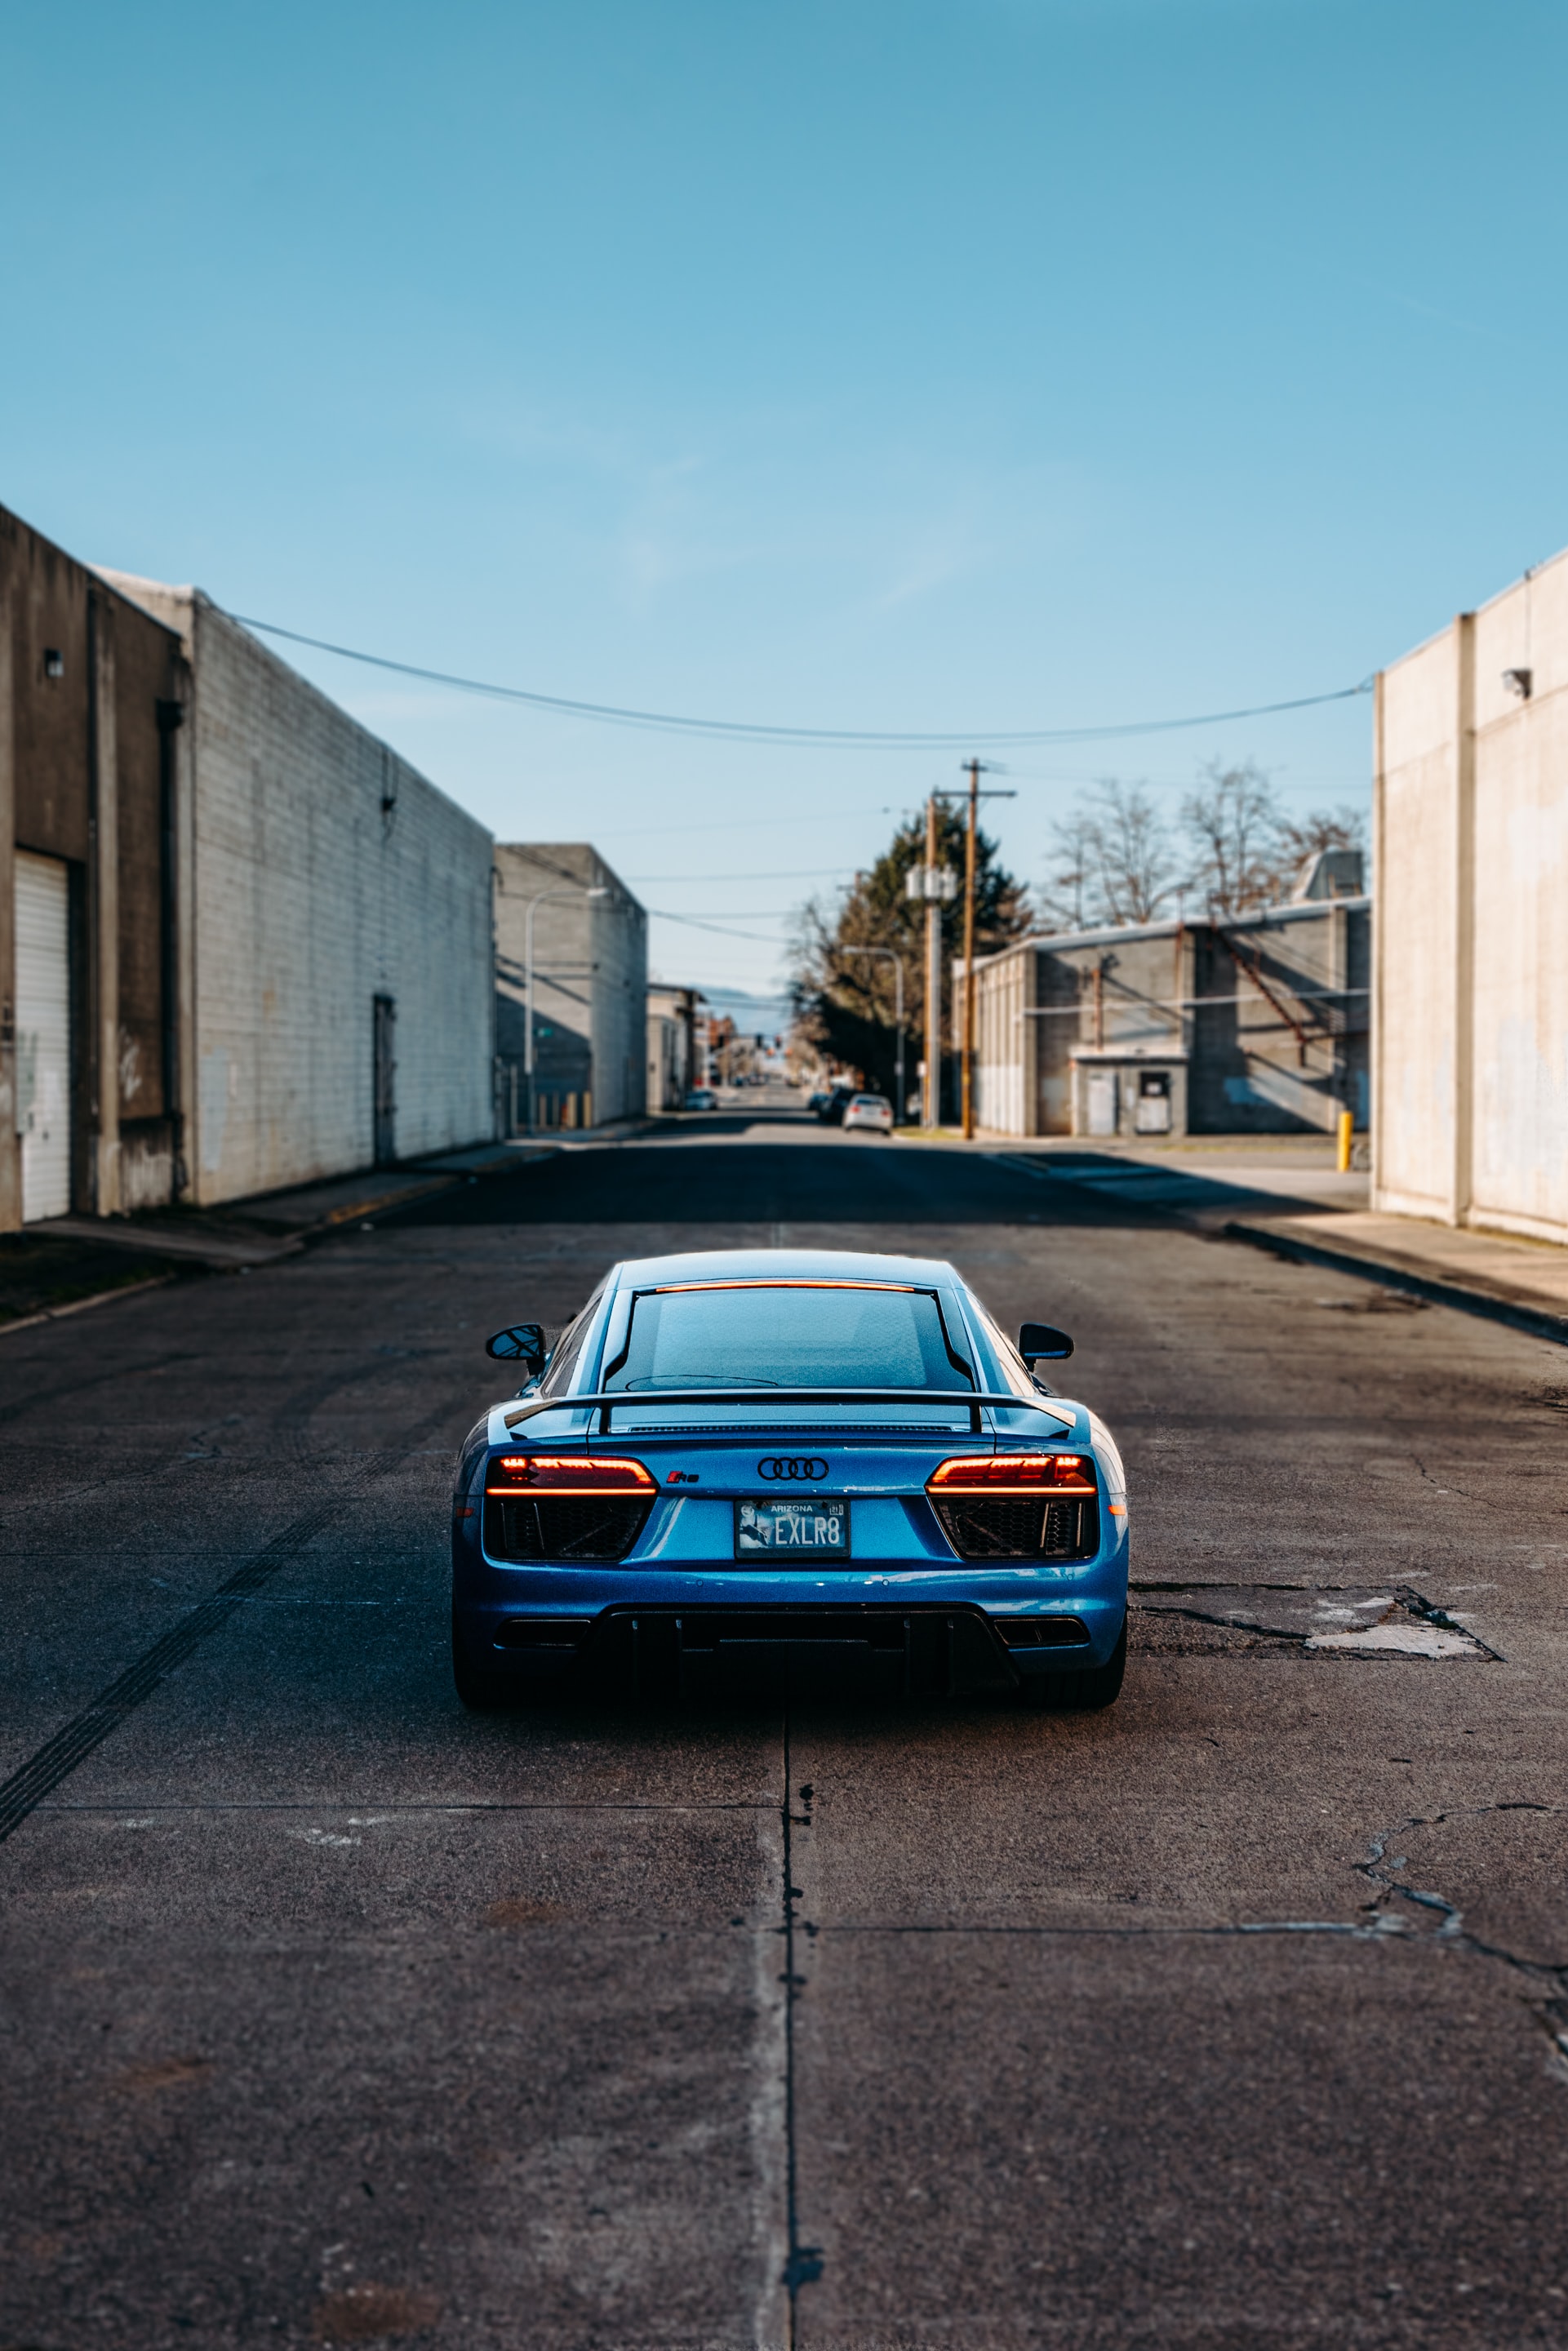 Best Audi R8 Background for mobile